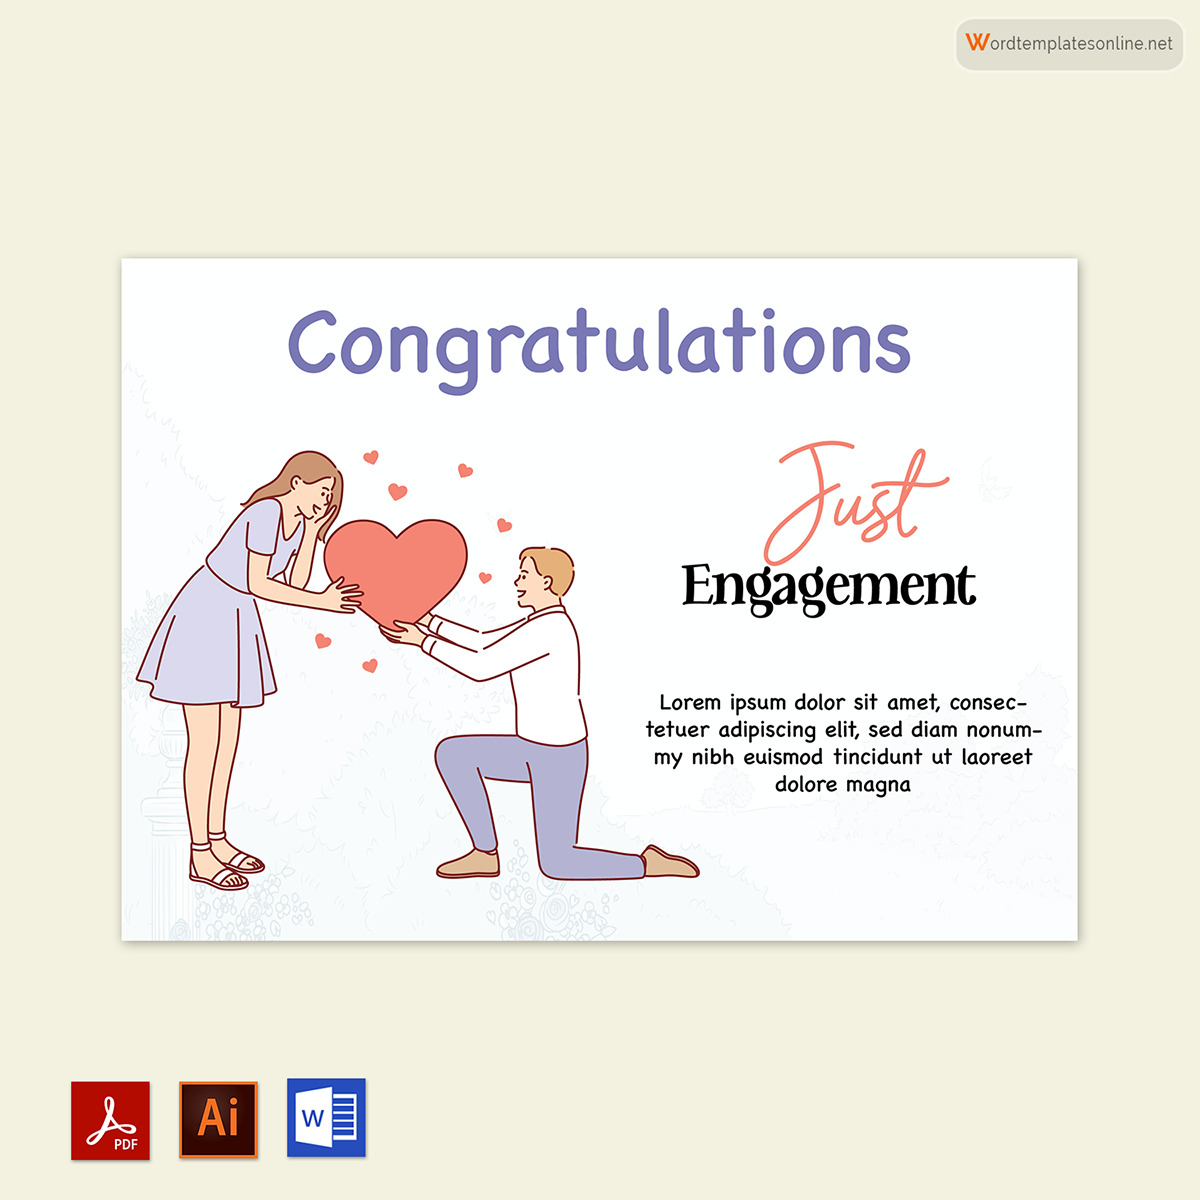 "Free congratulations card template in Word"